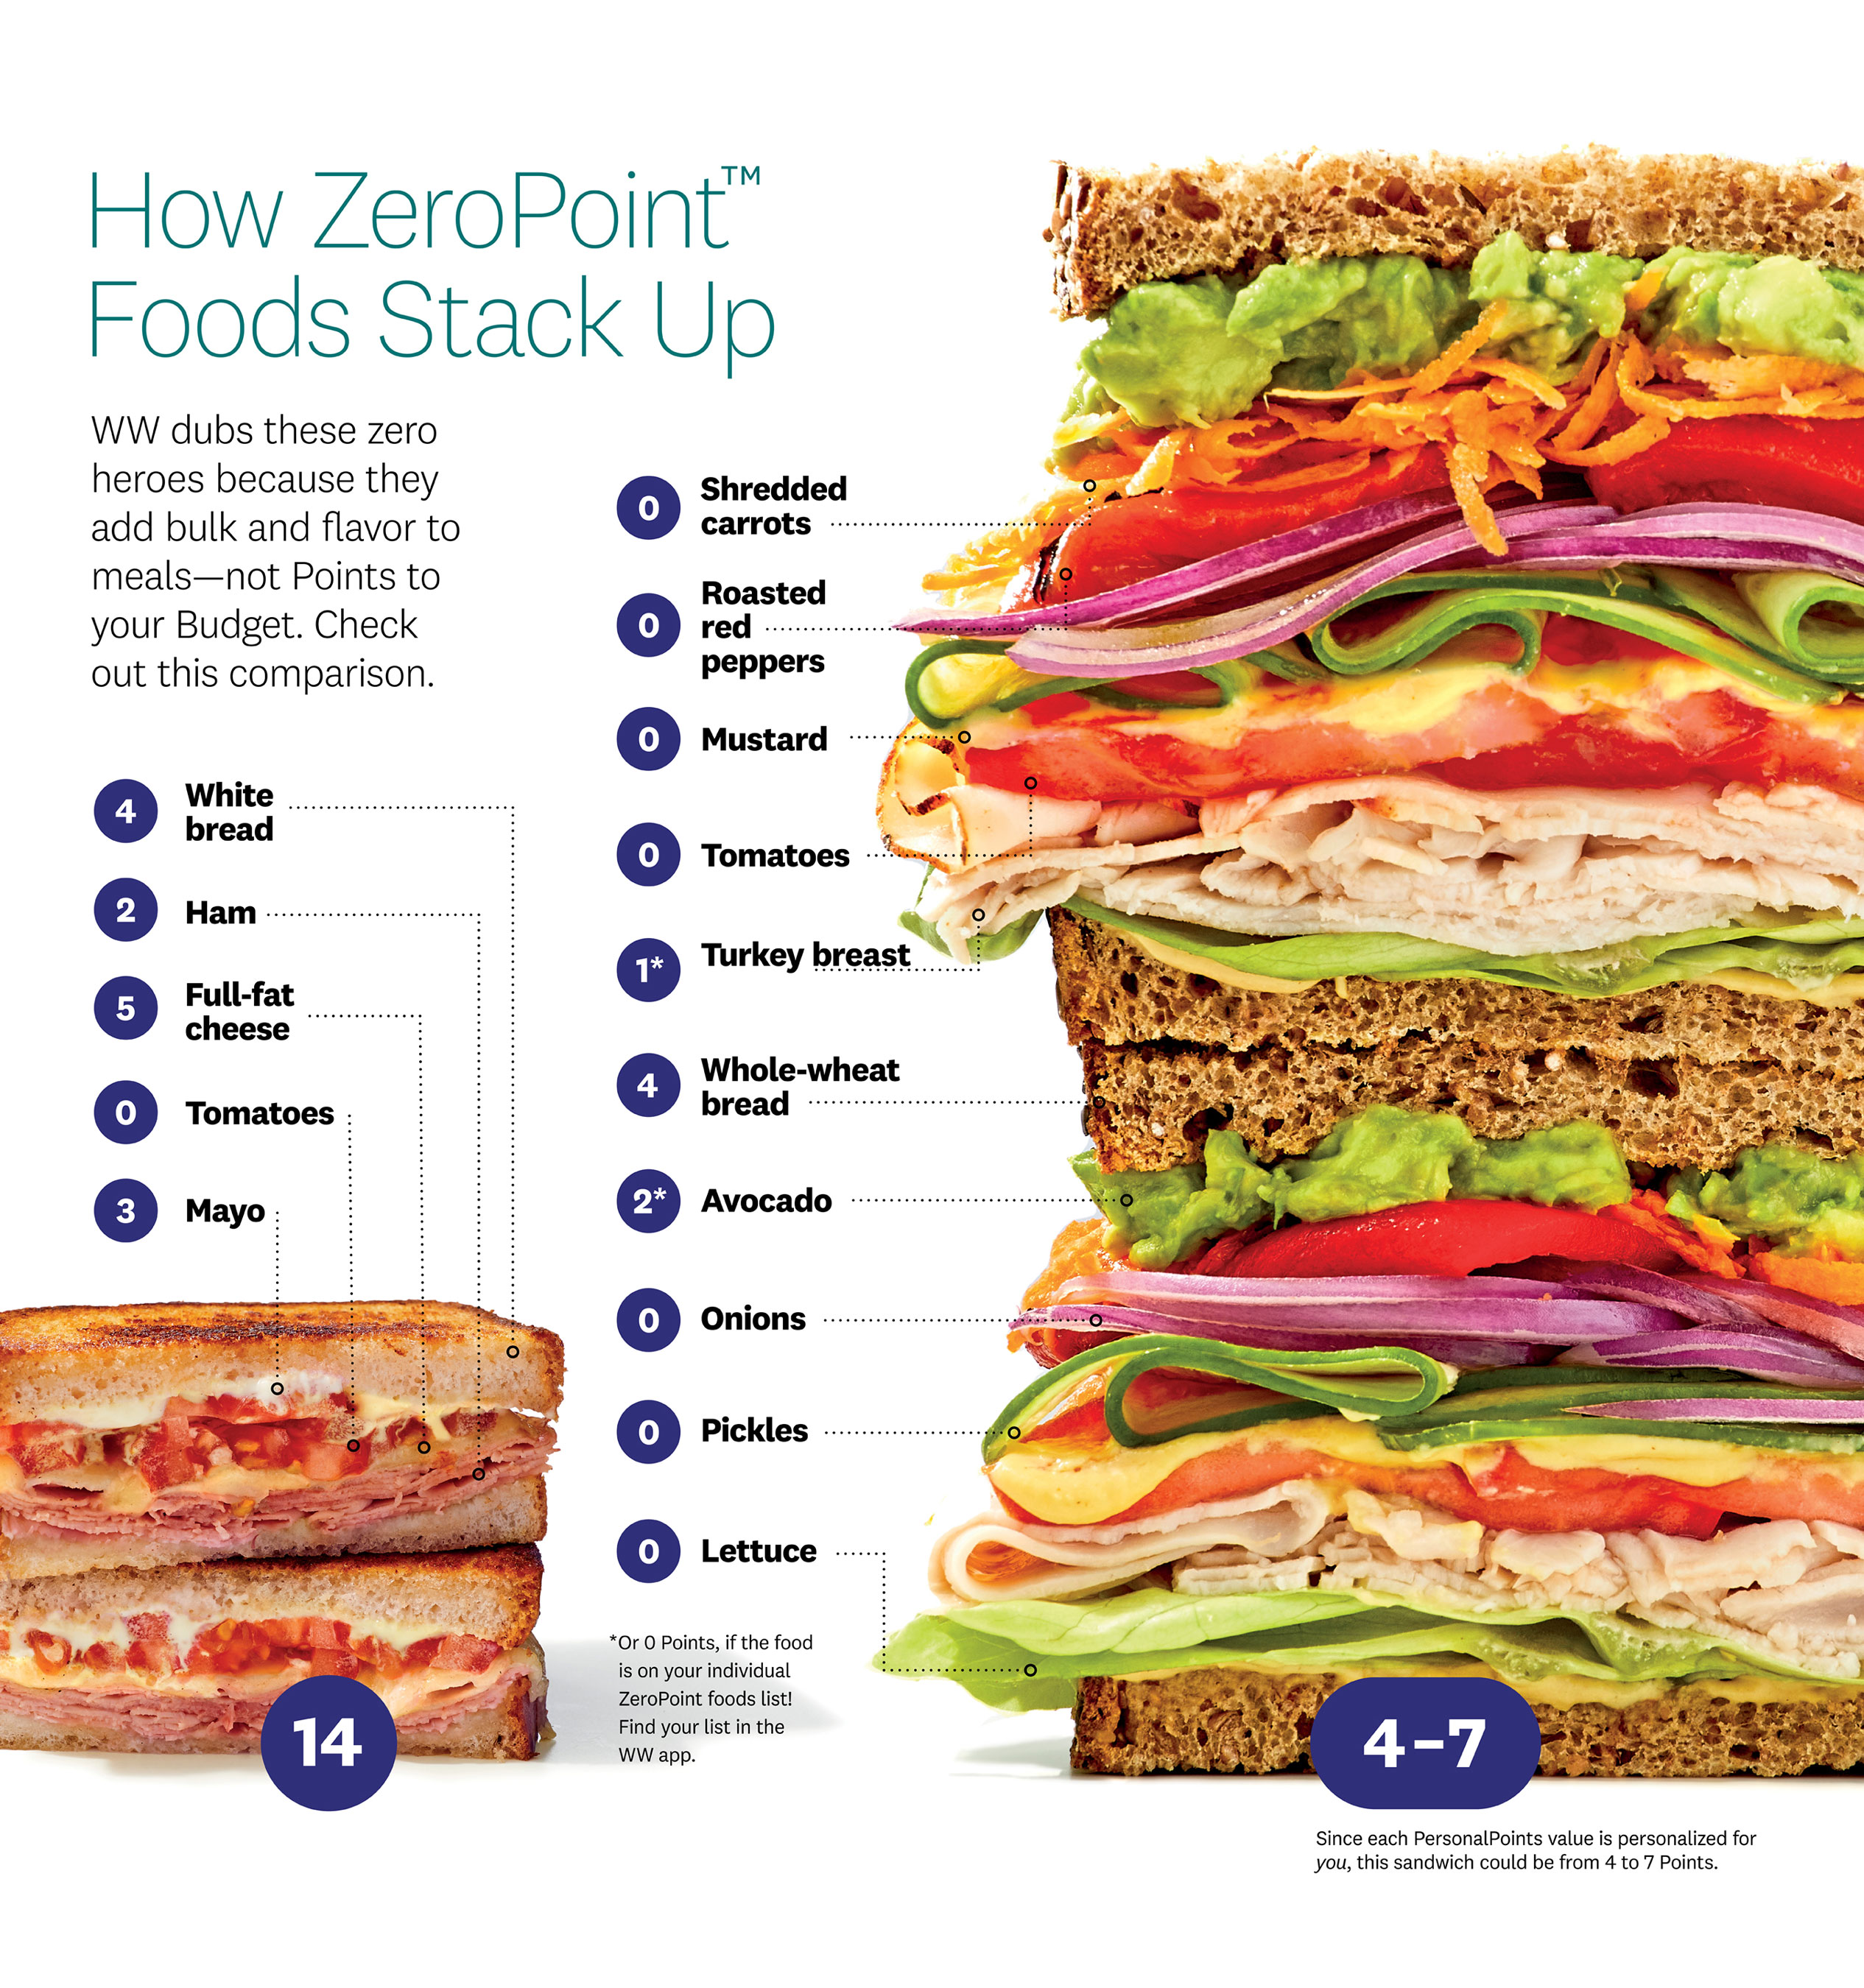 How ZeroPoint Foods Stack Up